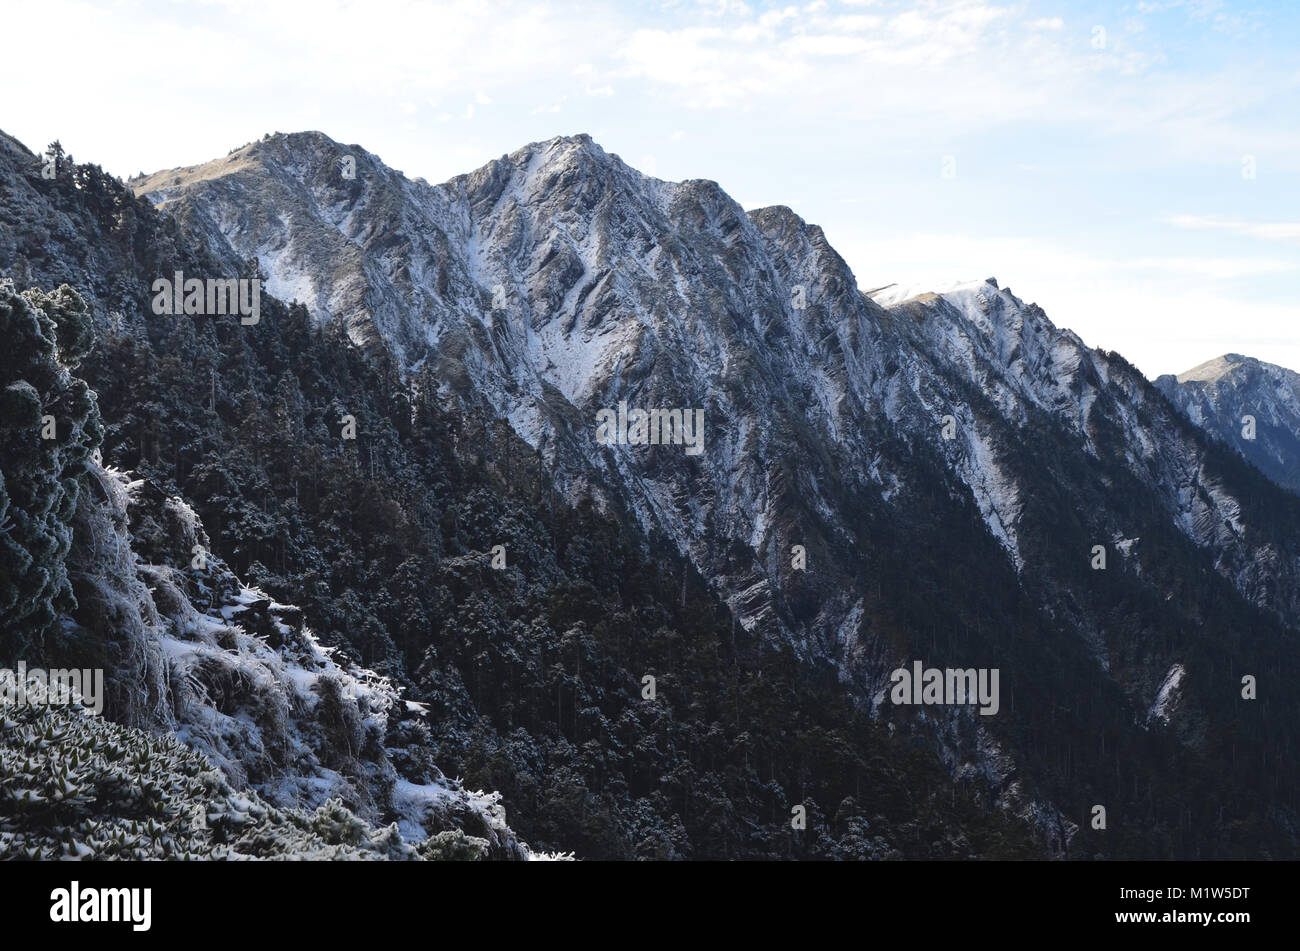 Snow and ice cover the highest peaks of Qilai mountains - Chilai Shan range, Taroko National park, northeastern Taiwan, in an early winter dawn Stock Photo